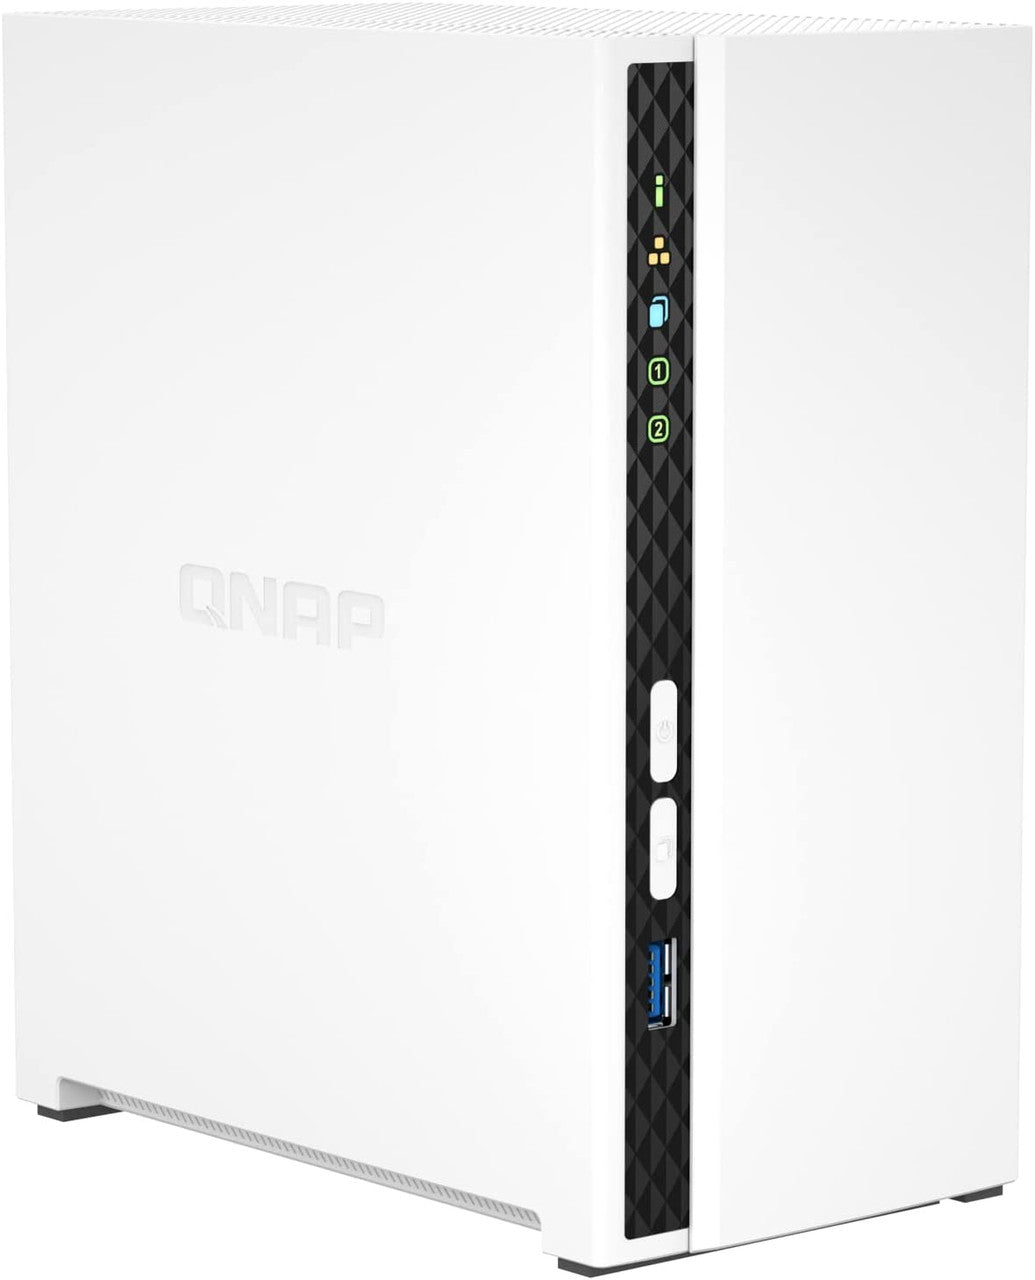 QNAP TS-233 2-Bay Desktop NAS with a 16TB (2 x 8TB) of Western Digital Red Plus Drives Fully Assembled and Tested